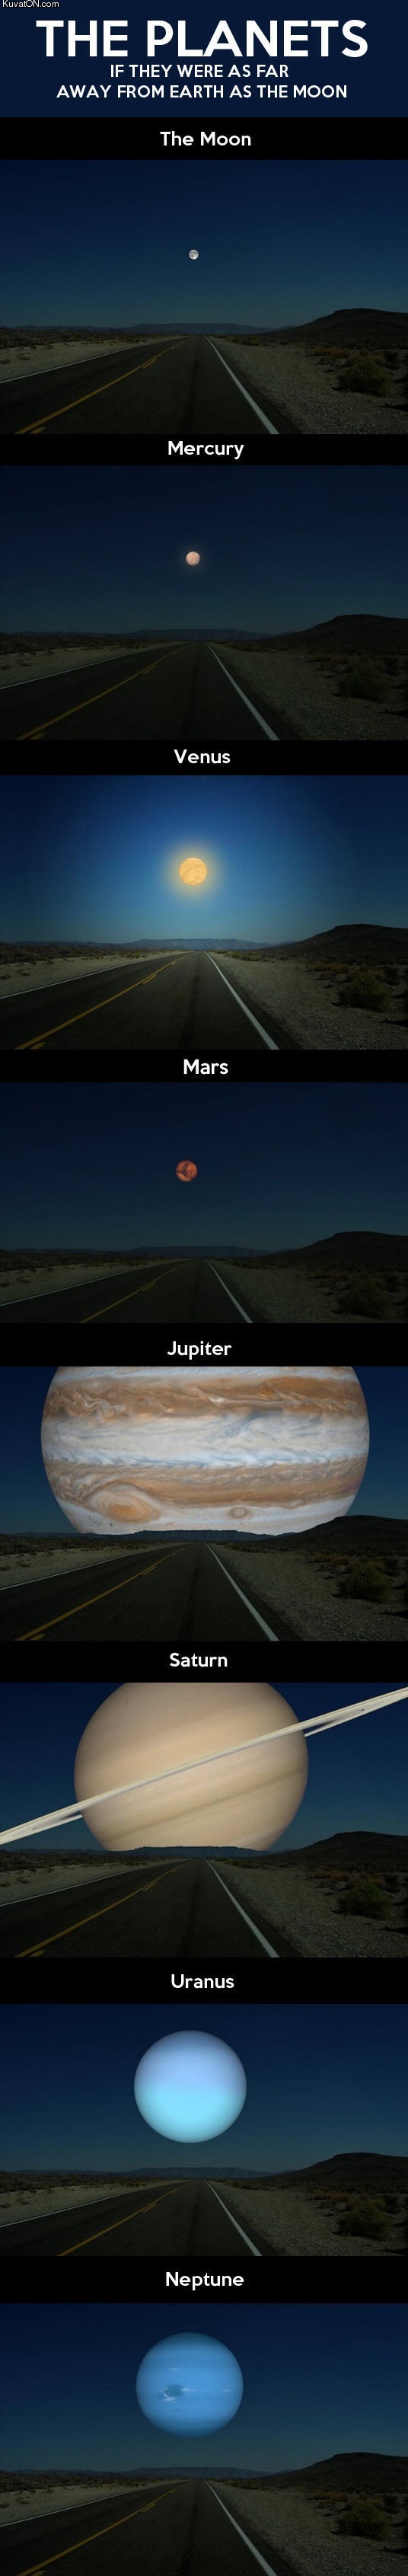 if_planets_were_as_far_away_from_earth_as_the_moon.jpg